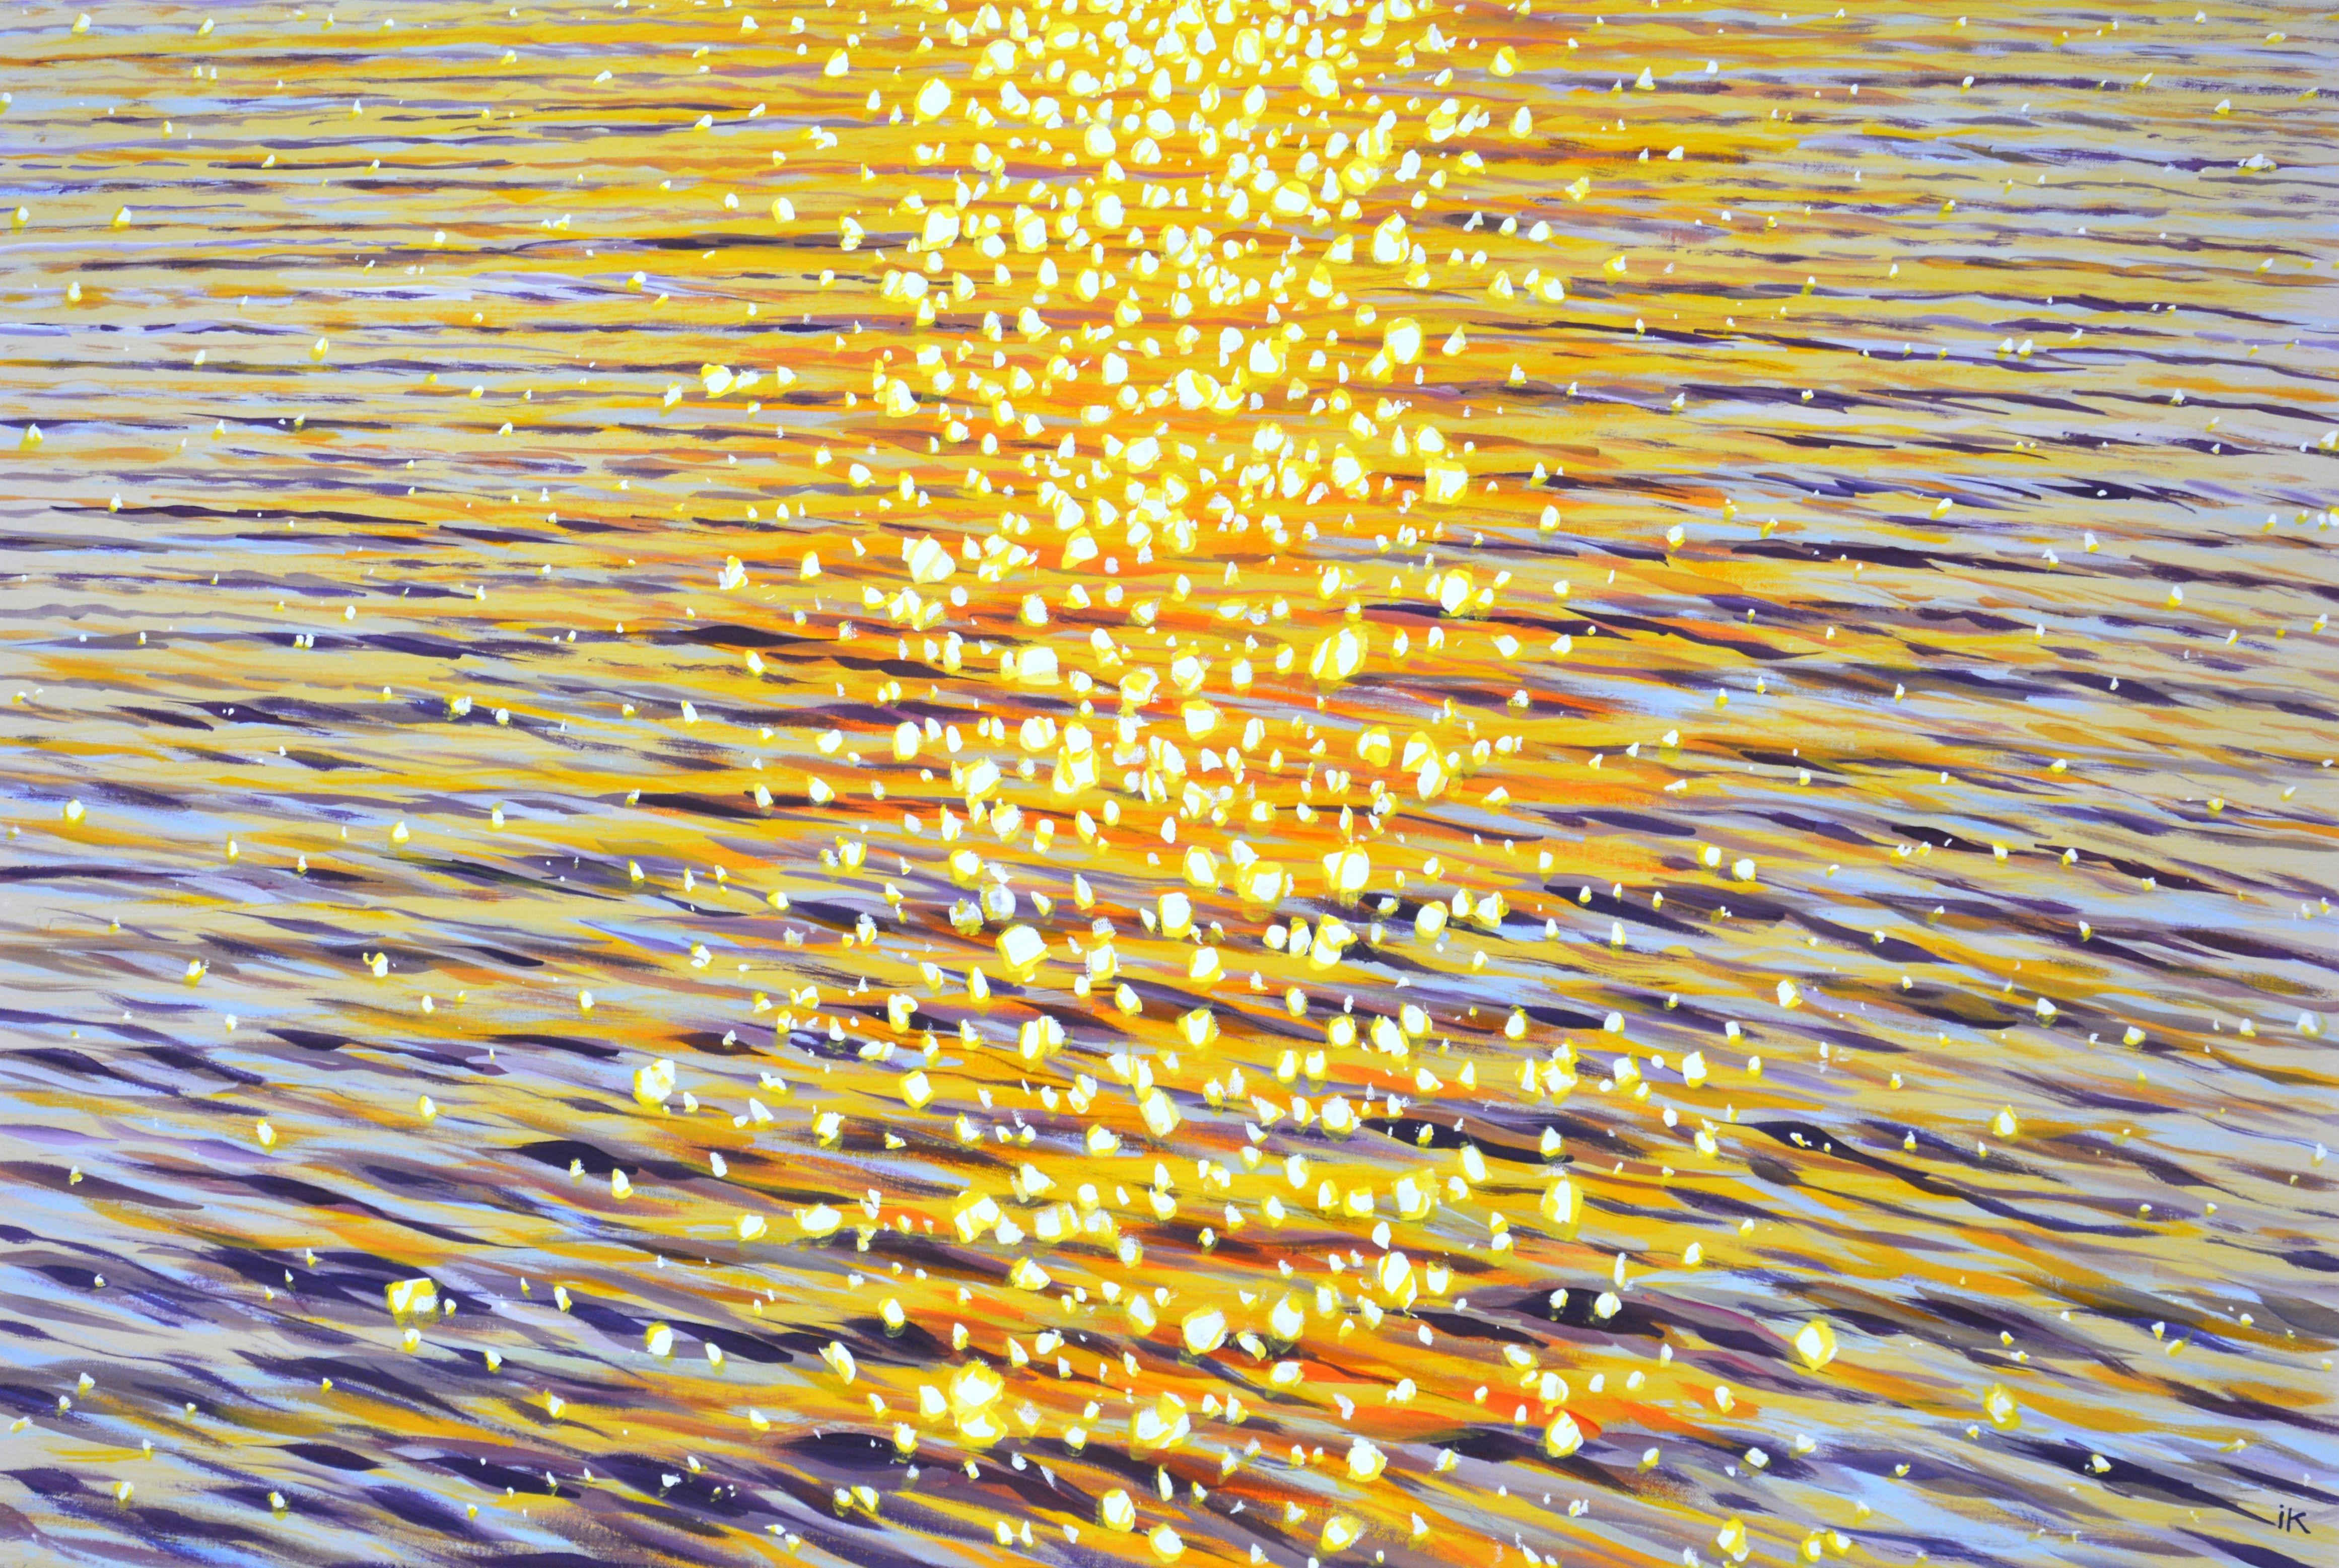 Evening sparks on the water. Golden glare of the sun on the water, ocean, sunset, small waves, serene view create an atmosphere of relaxation and romance. Nature is the best source of inspiration. Made in the style of realism, warm-cold palette